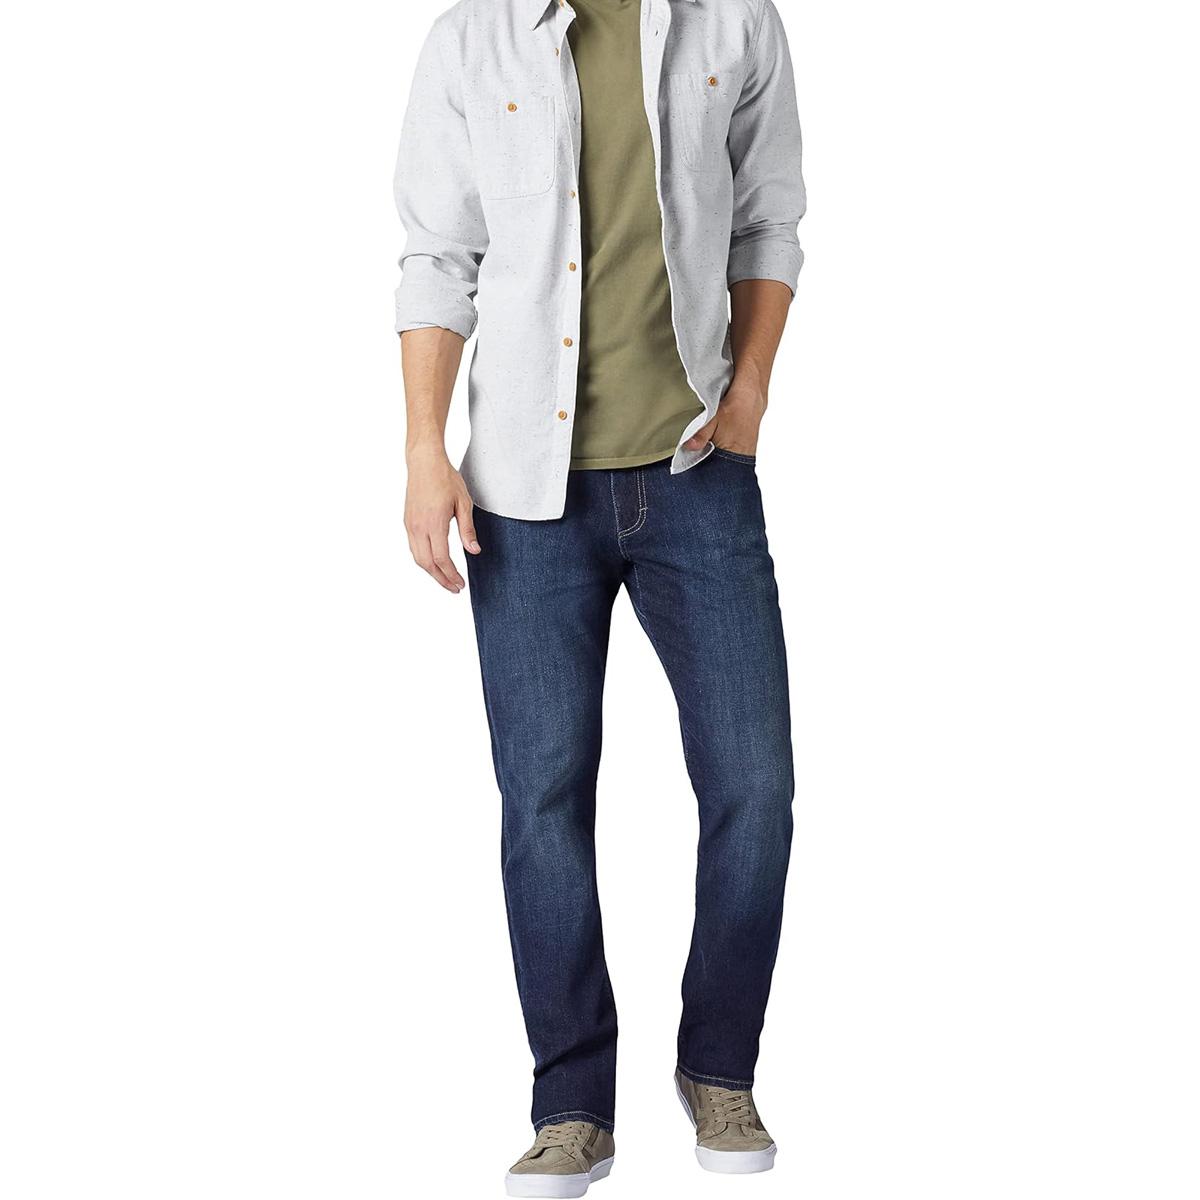 Lee Mens Extreme Motion Straight Taper Jean for $21